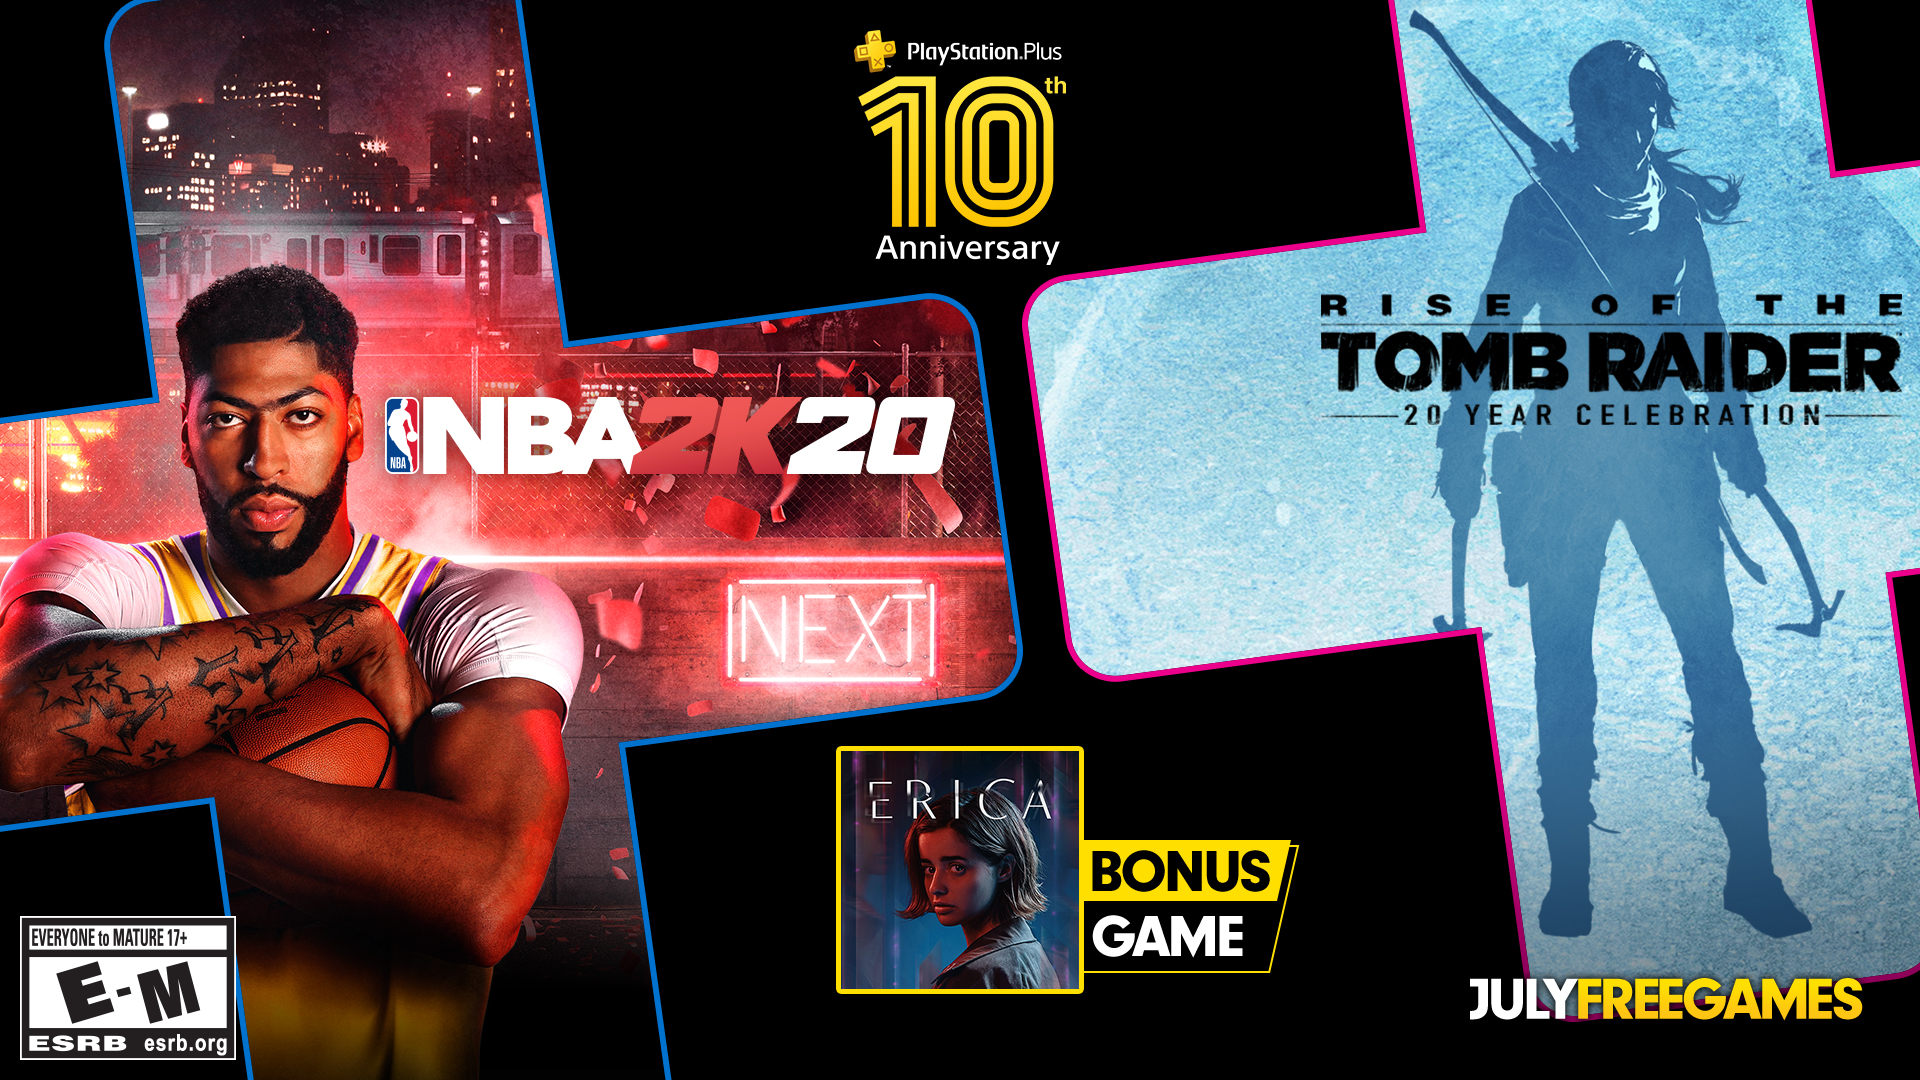 PlayStation on Twitter: "As PS Plus reaches its tenth anniversary, your games for July are revealed: NBA 2K20, Rise of the Tomb Raider and Erica: https://t.co/B5p4fmWgqp https://t.co/JoEaQSQn0V" / Twitter